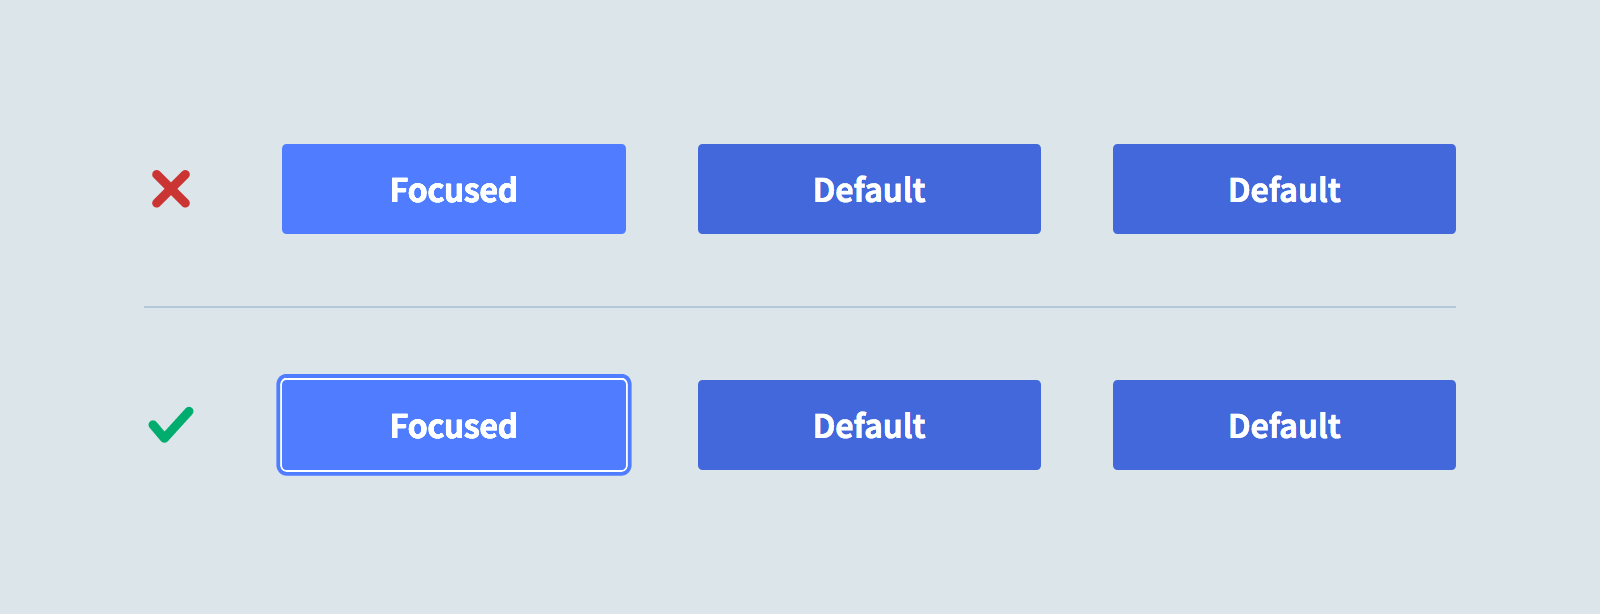 Mockup of good and bad focus designs juxtaposed with other button states